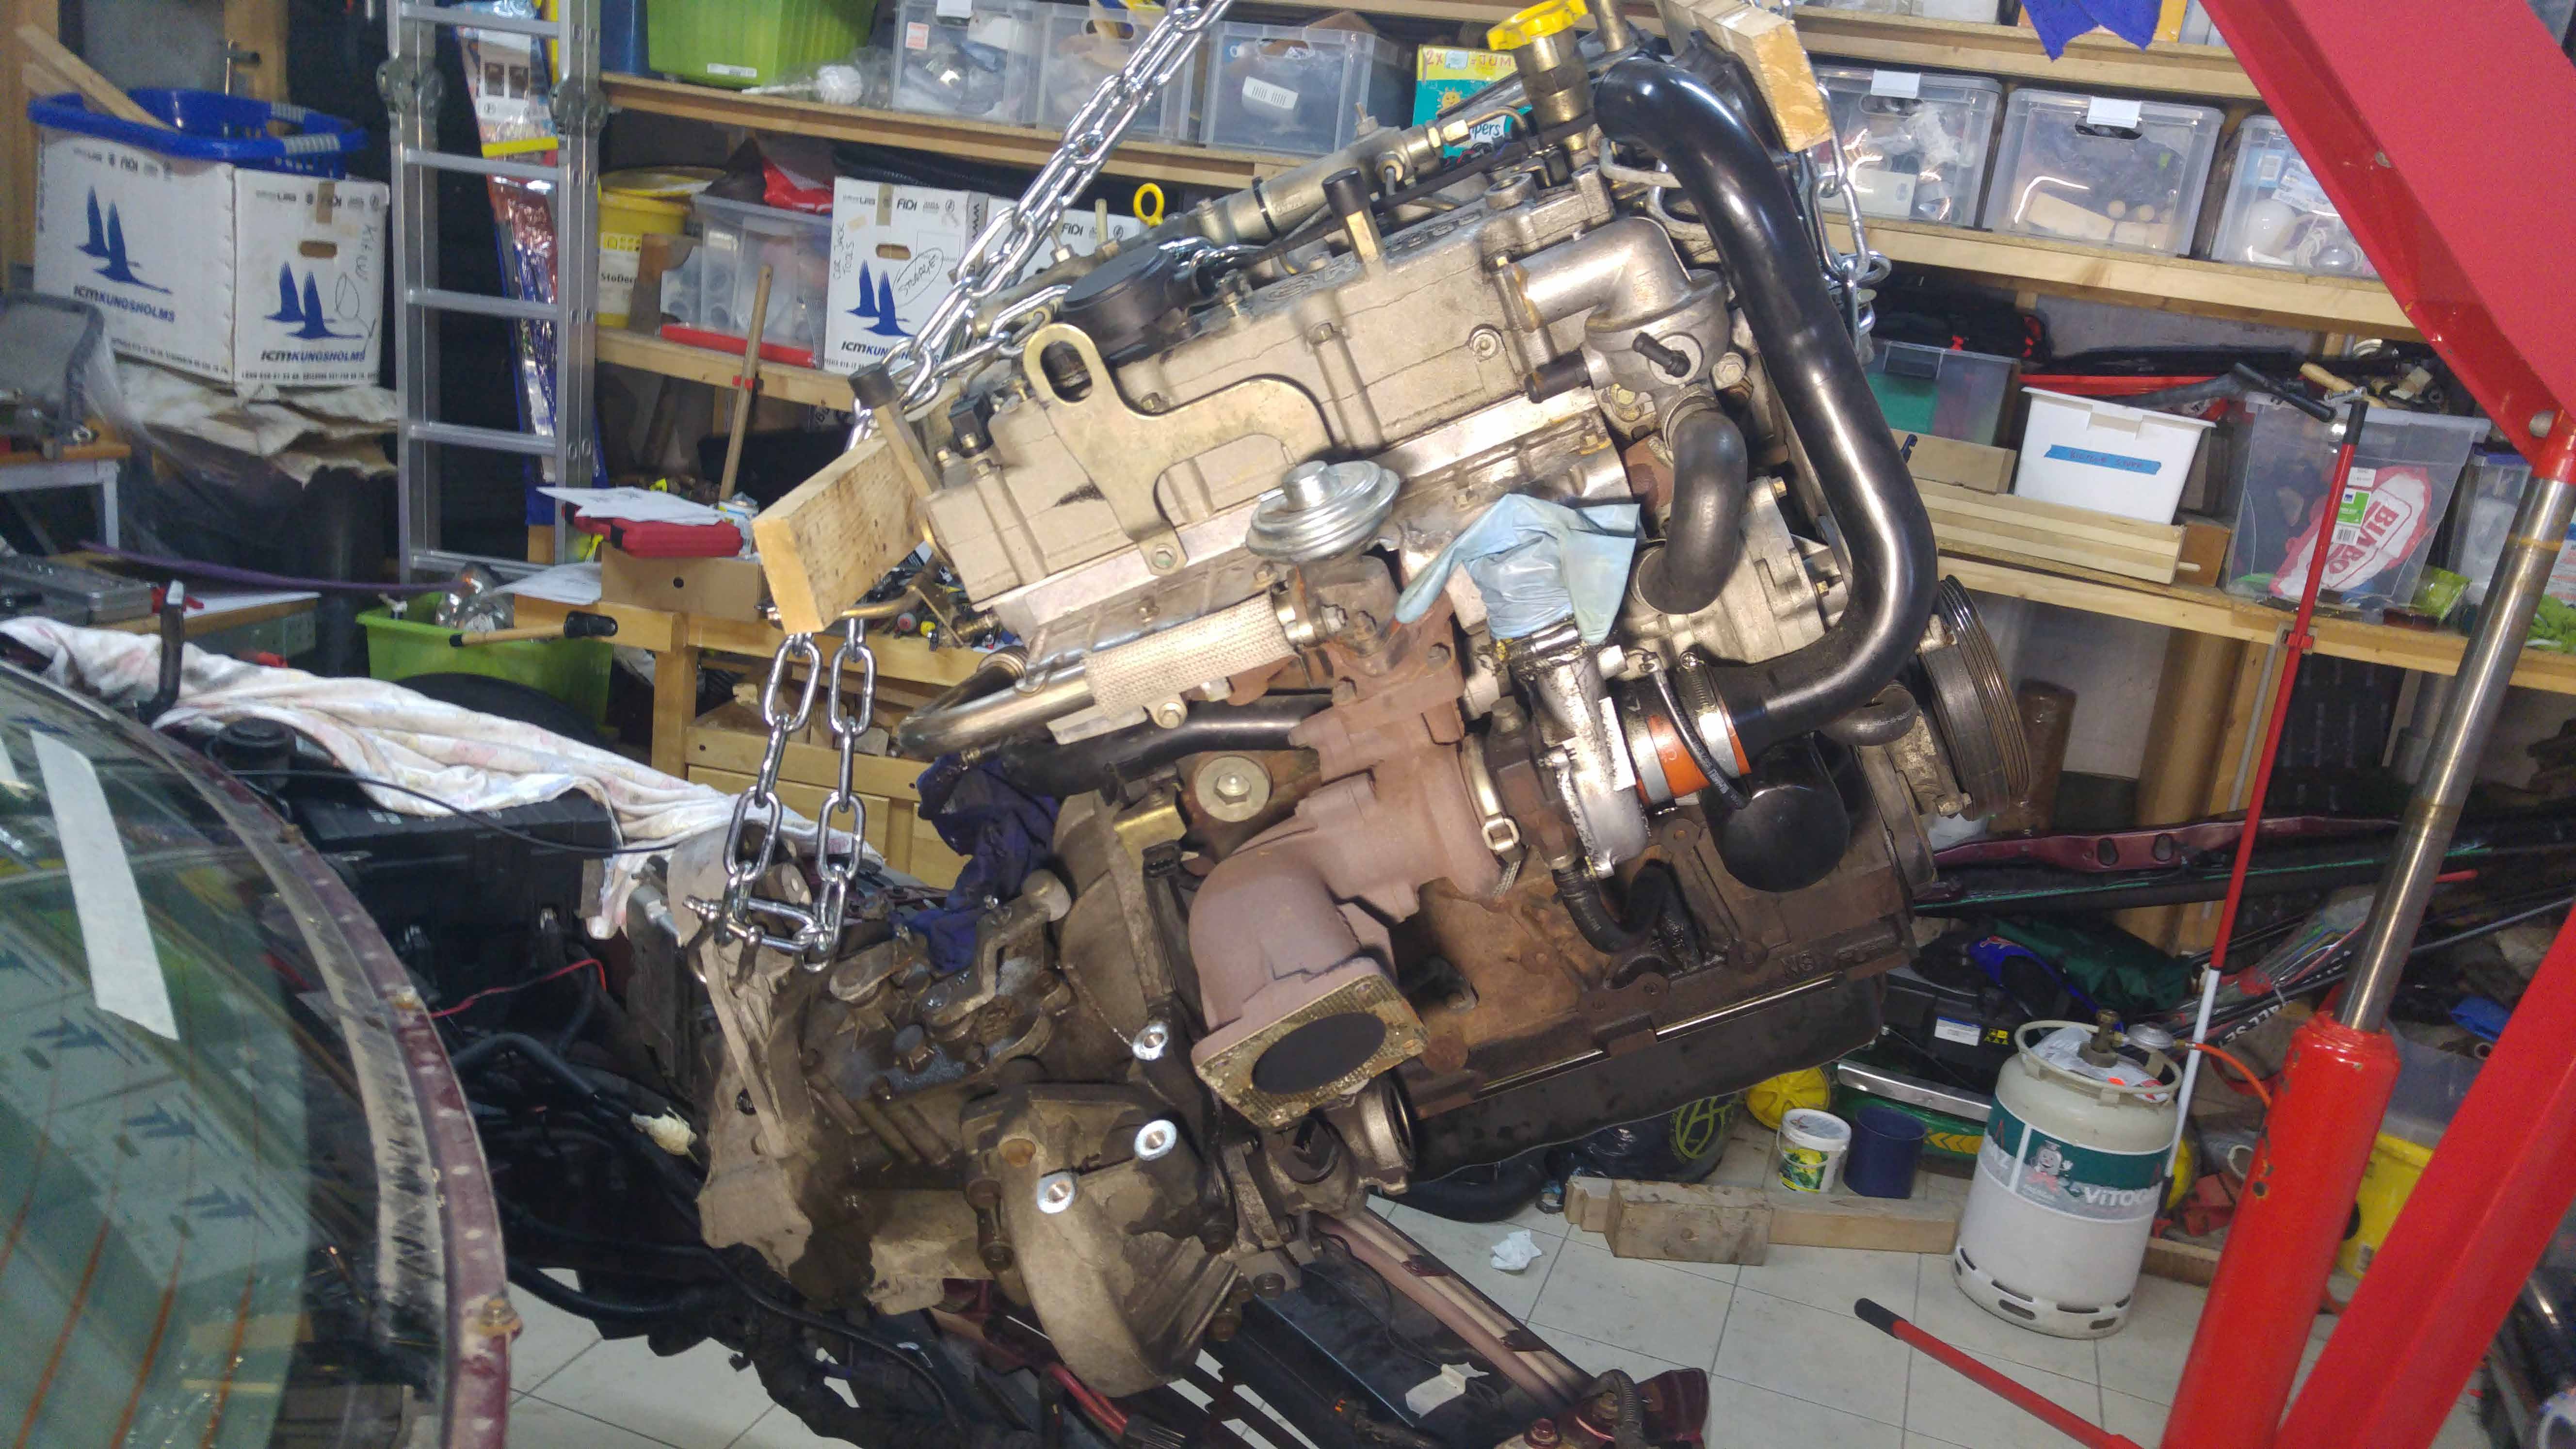 CRD 2.5 engine and transmission removal, overhaul